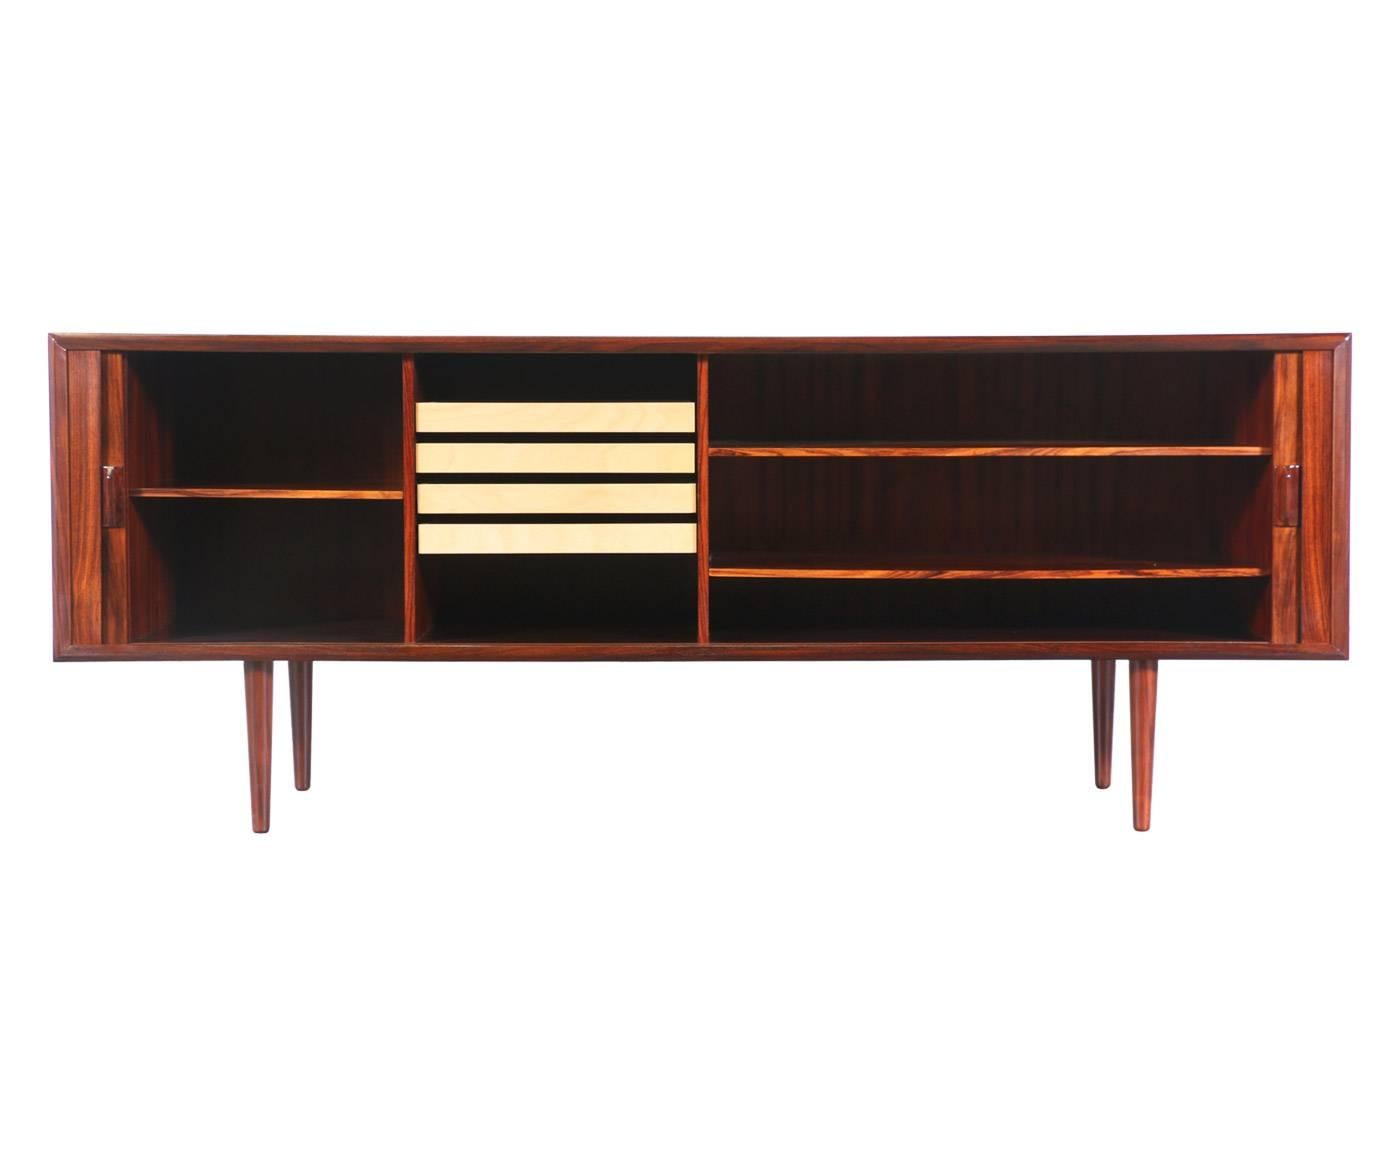 Designer: Svend A. Larsen.
Manufacturer: Faarup Møbelfabrik.
Period/style: Danish modern.
Country: Denmark.
Date: 1950s.

Dimensions: 31.25″ H x 79.75″ W x 19″ D.
Materials: Rosewood.
Condition: Excellent, newly refinished.
Number of items: